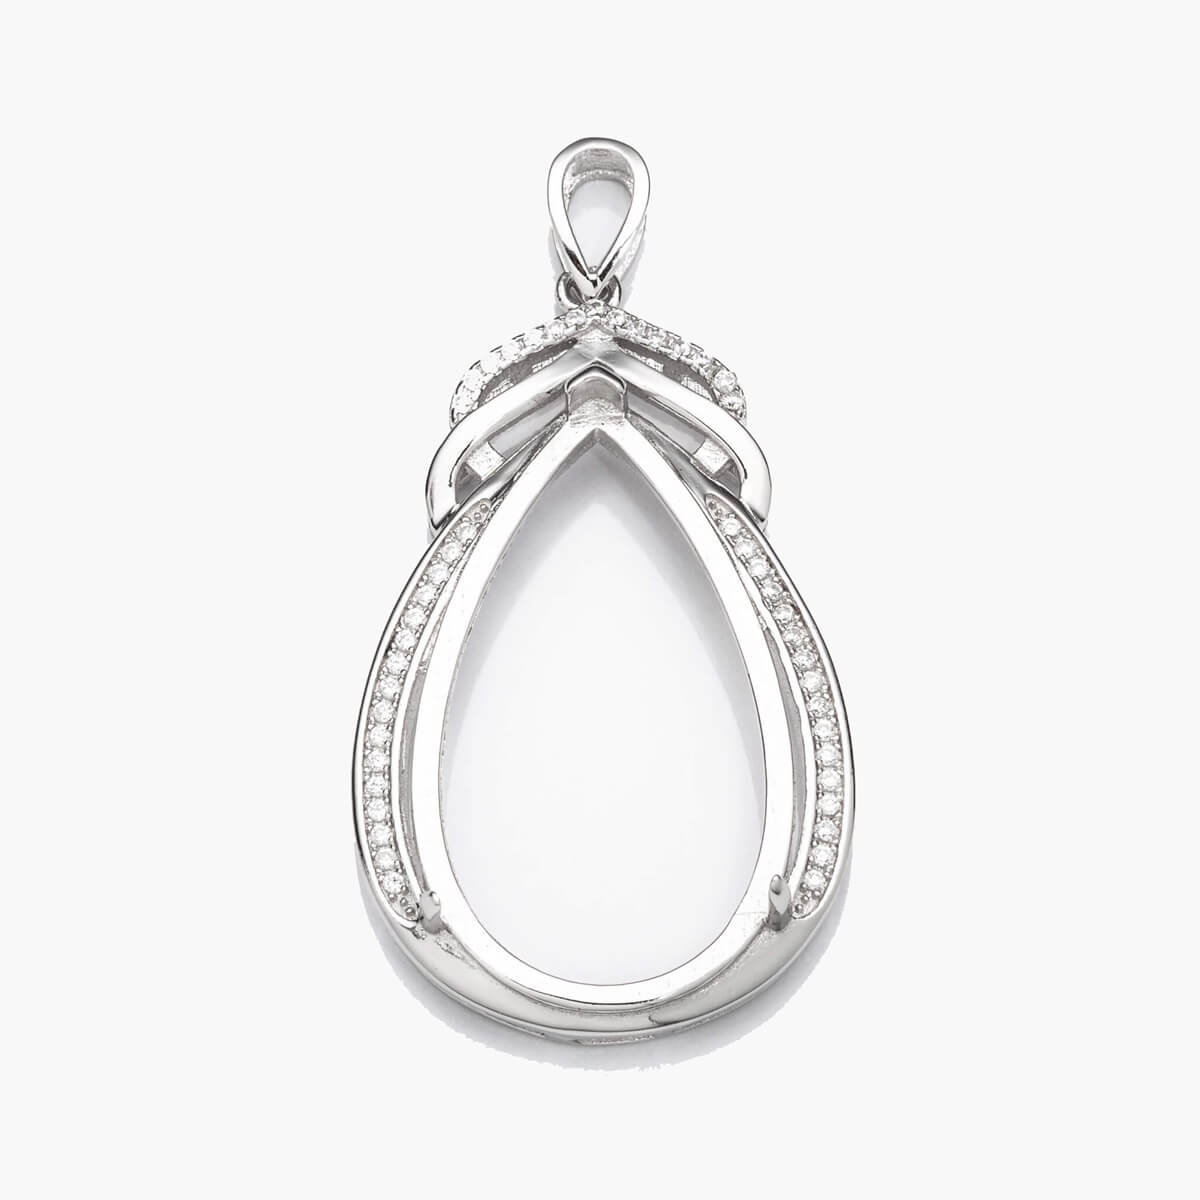 Pear Pendant with Cubic Zirconia Inlays and Pear Shape Mounting and Bail in Sterling Silver 16x28mm